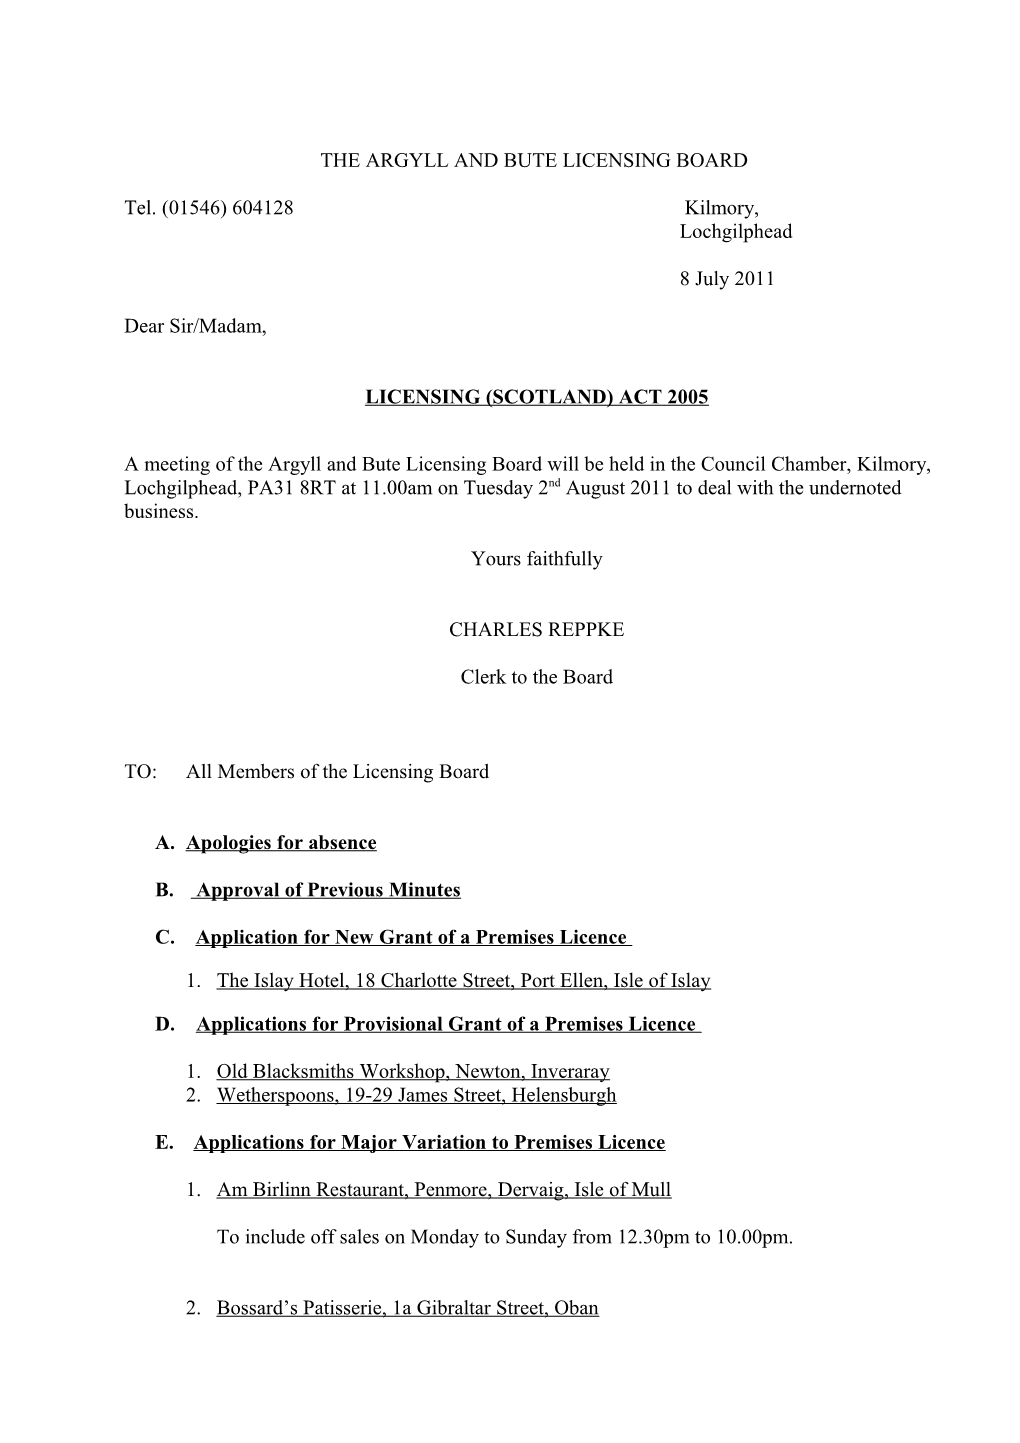 The Argyll and Bute Licensing Board